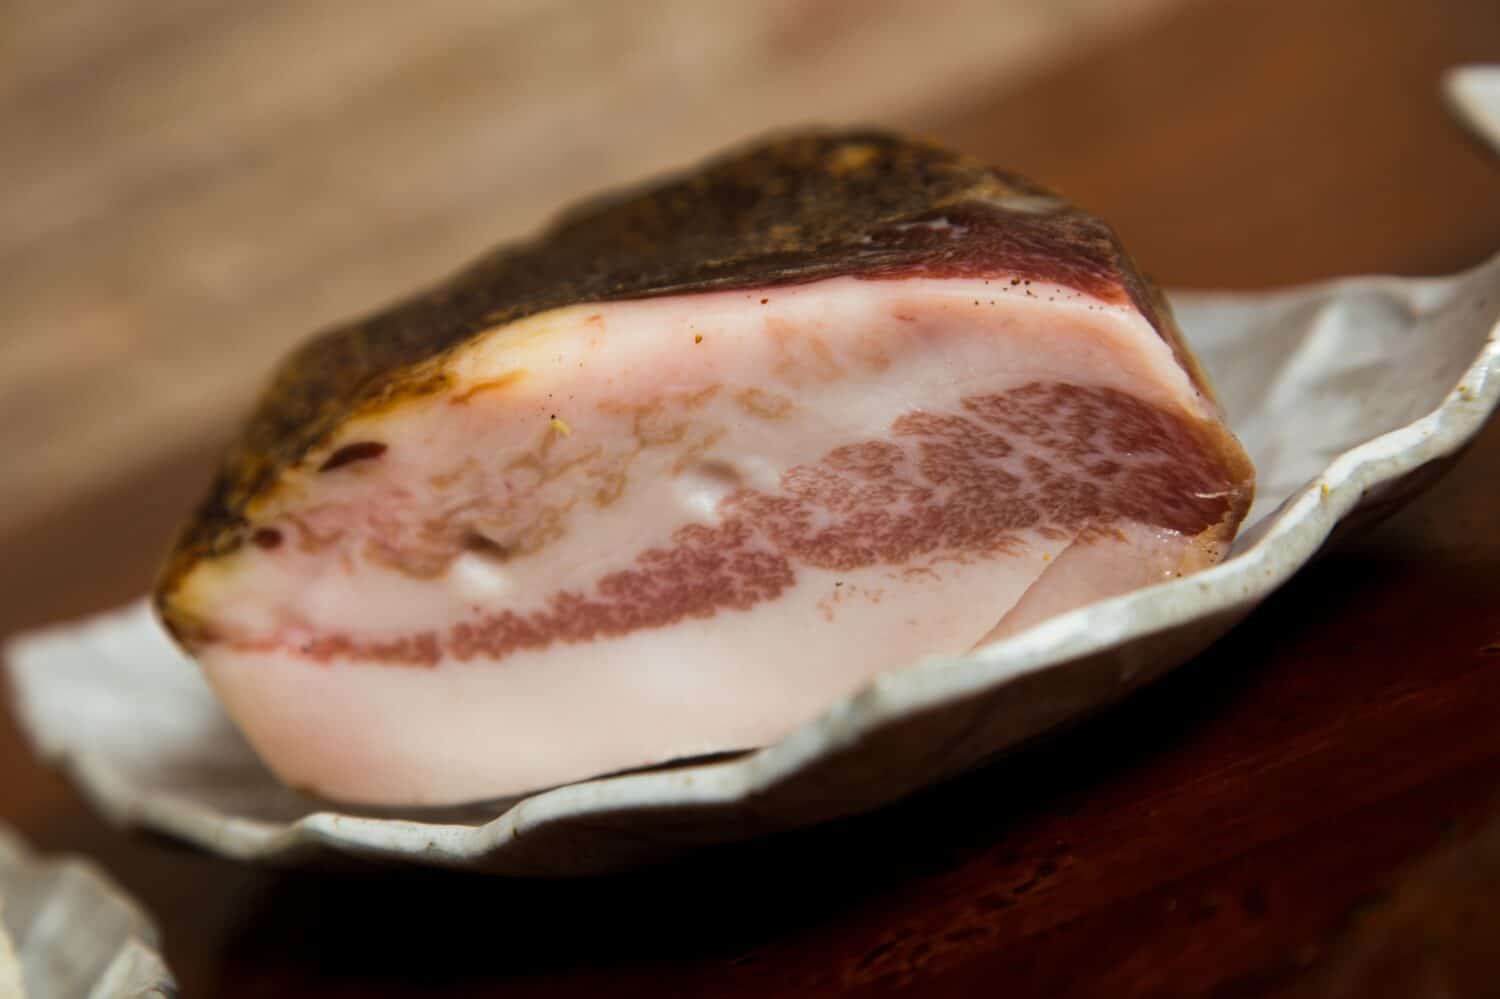 Guanciale is an Italian non-smoked cured meat prepared with pork cheeks or cheeks.